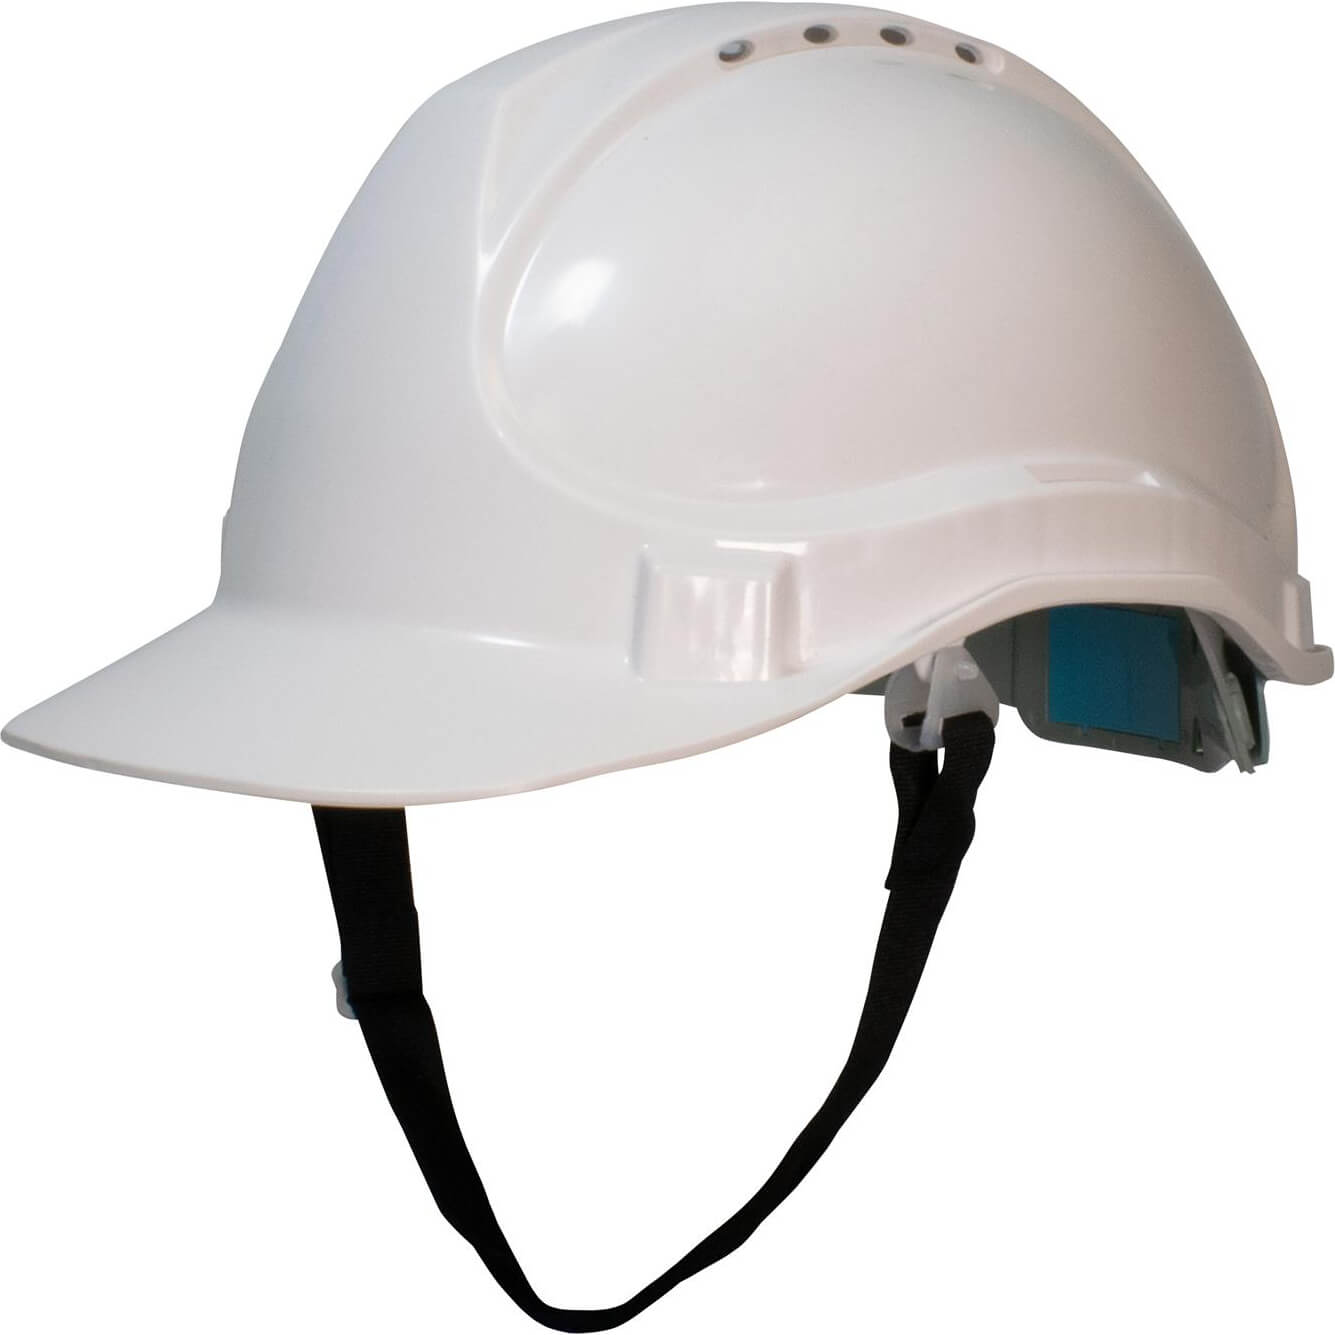 Scan Deluxe Safety Helmet and Chin Strap White